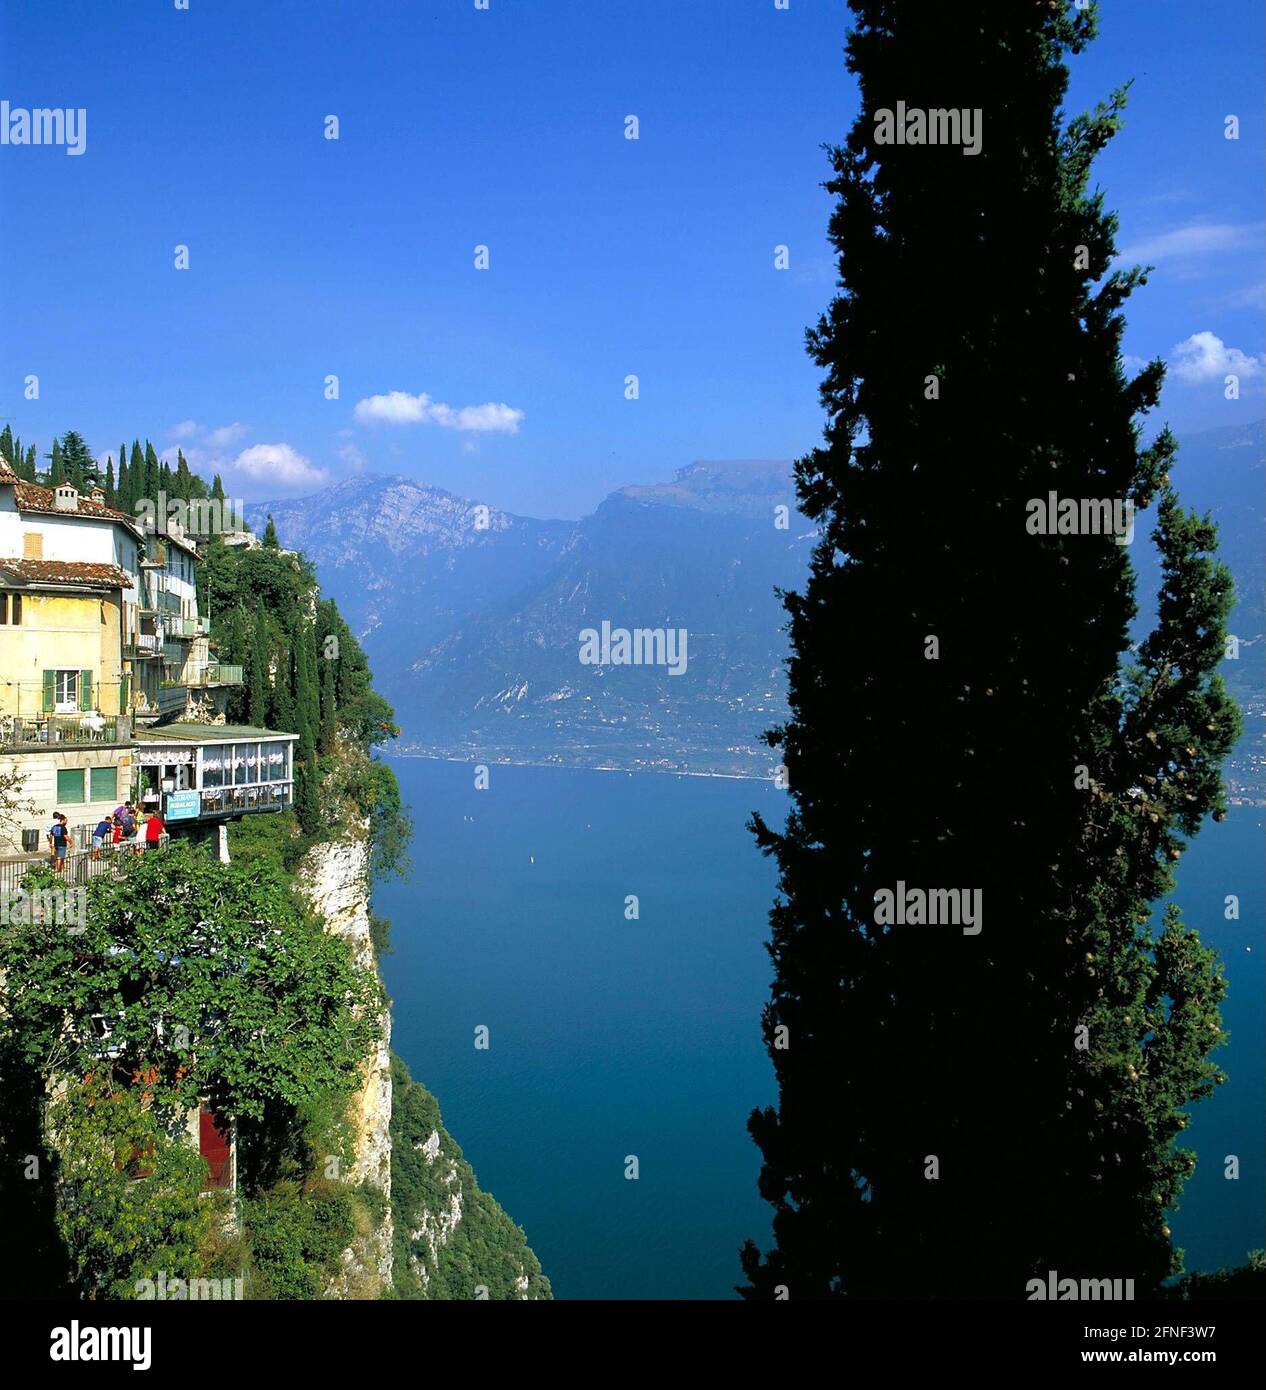 "Lake Garda, Pieve di Tremosine, view of the restaurant ""Miralago"" with its so called ""Schauder-Terrasse"", 300m directly above the lake, 1997. [automated translation]" Stock Photo